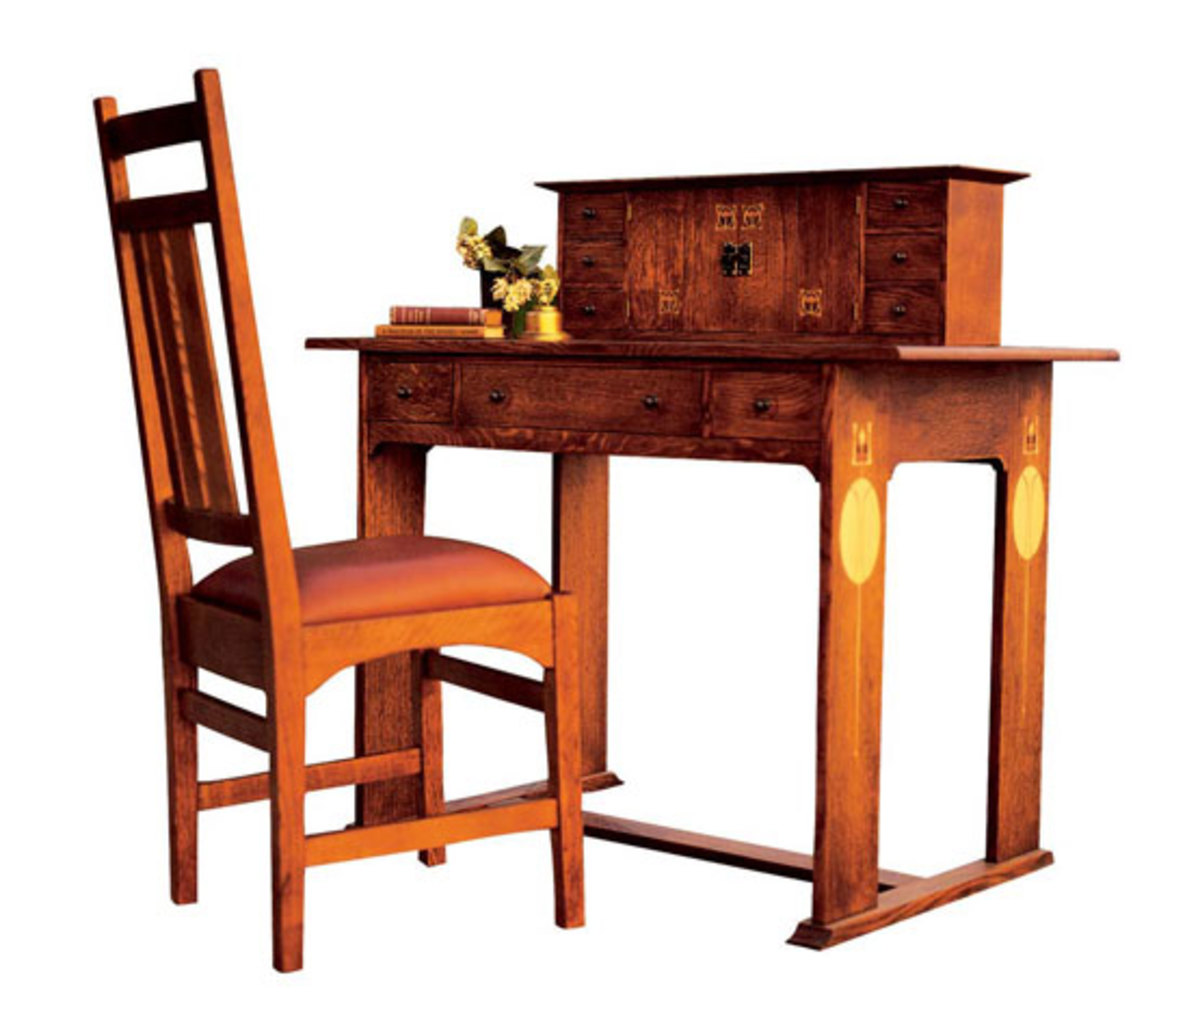 Stickley has reissued the 1904 Harvey Ellis-designed desk and side chair in quarter-sawn white oak with copper and hardwood inlays. (An original sold at Christie’s for $74,000.)